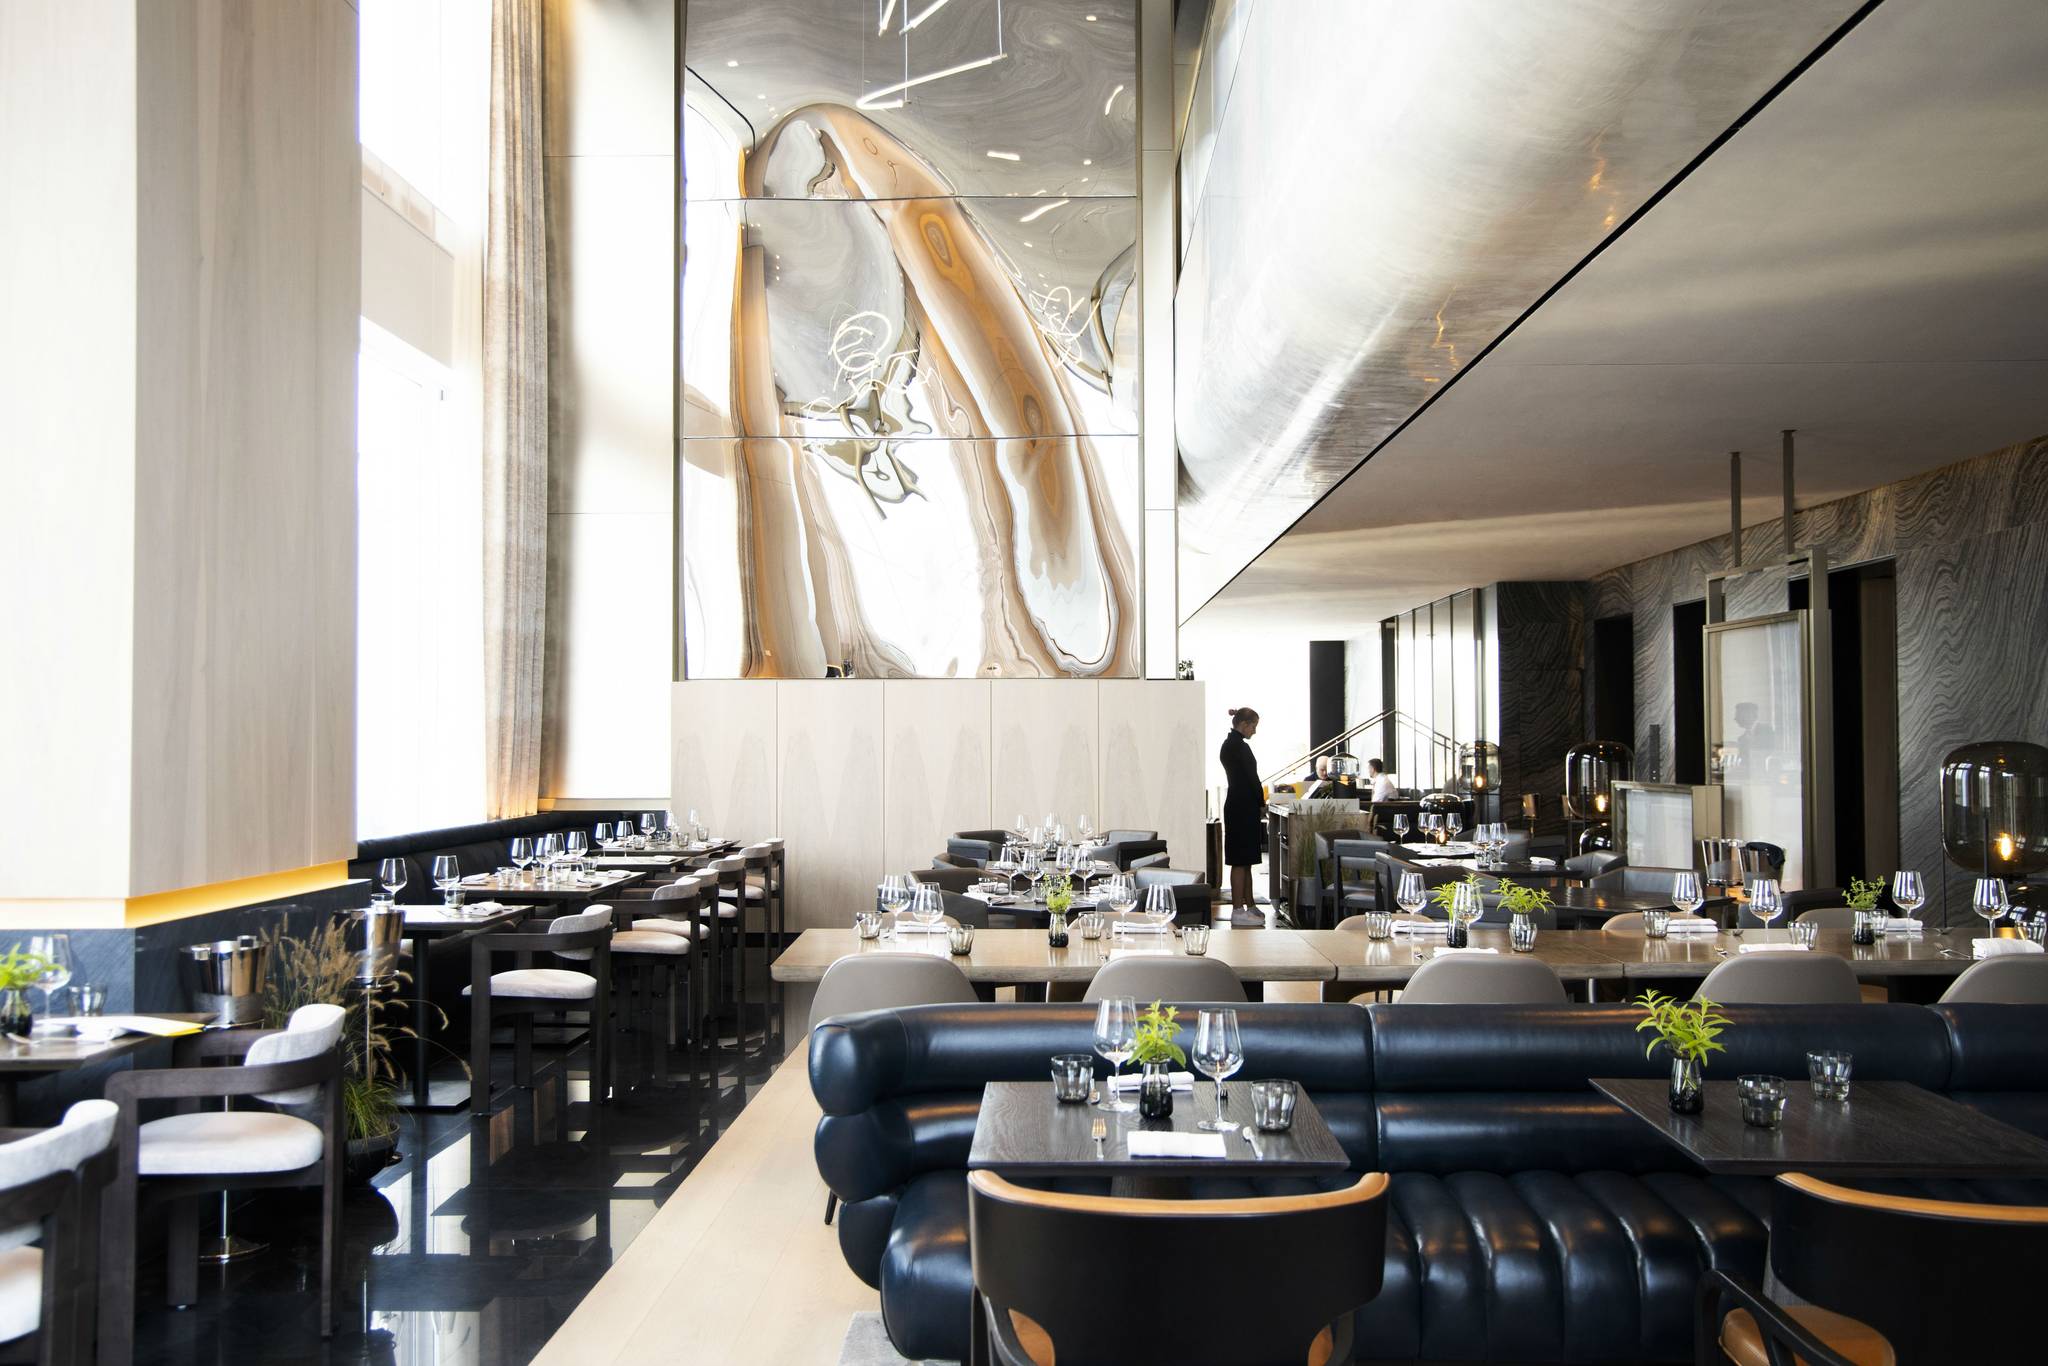 What do luxury diners want from restaurants?